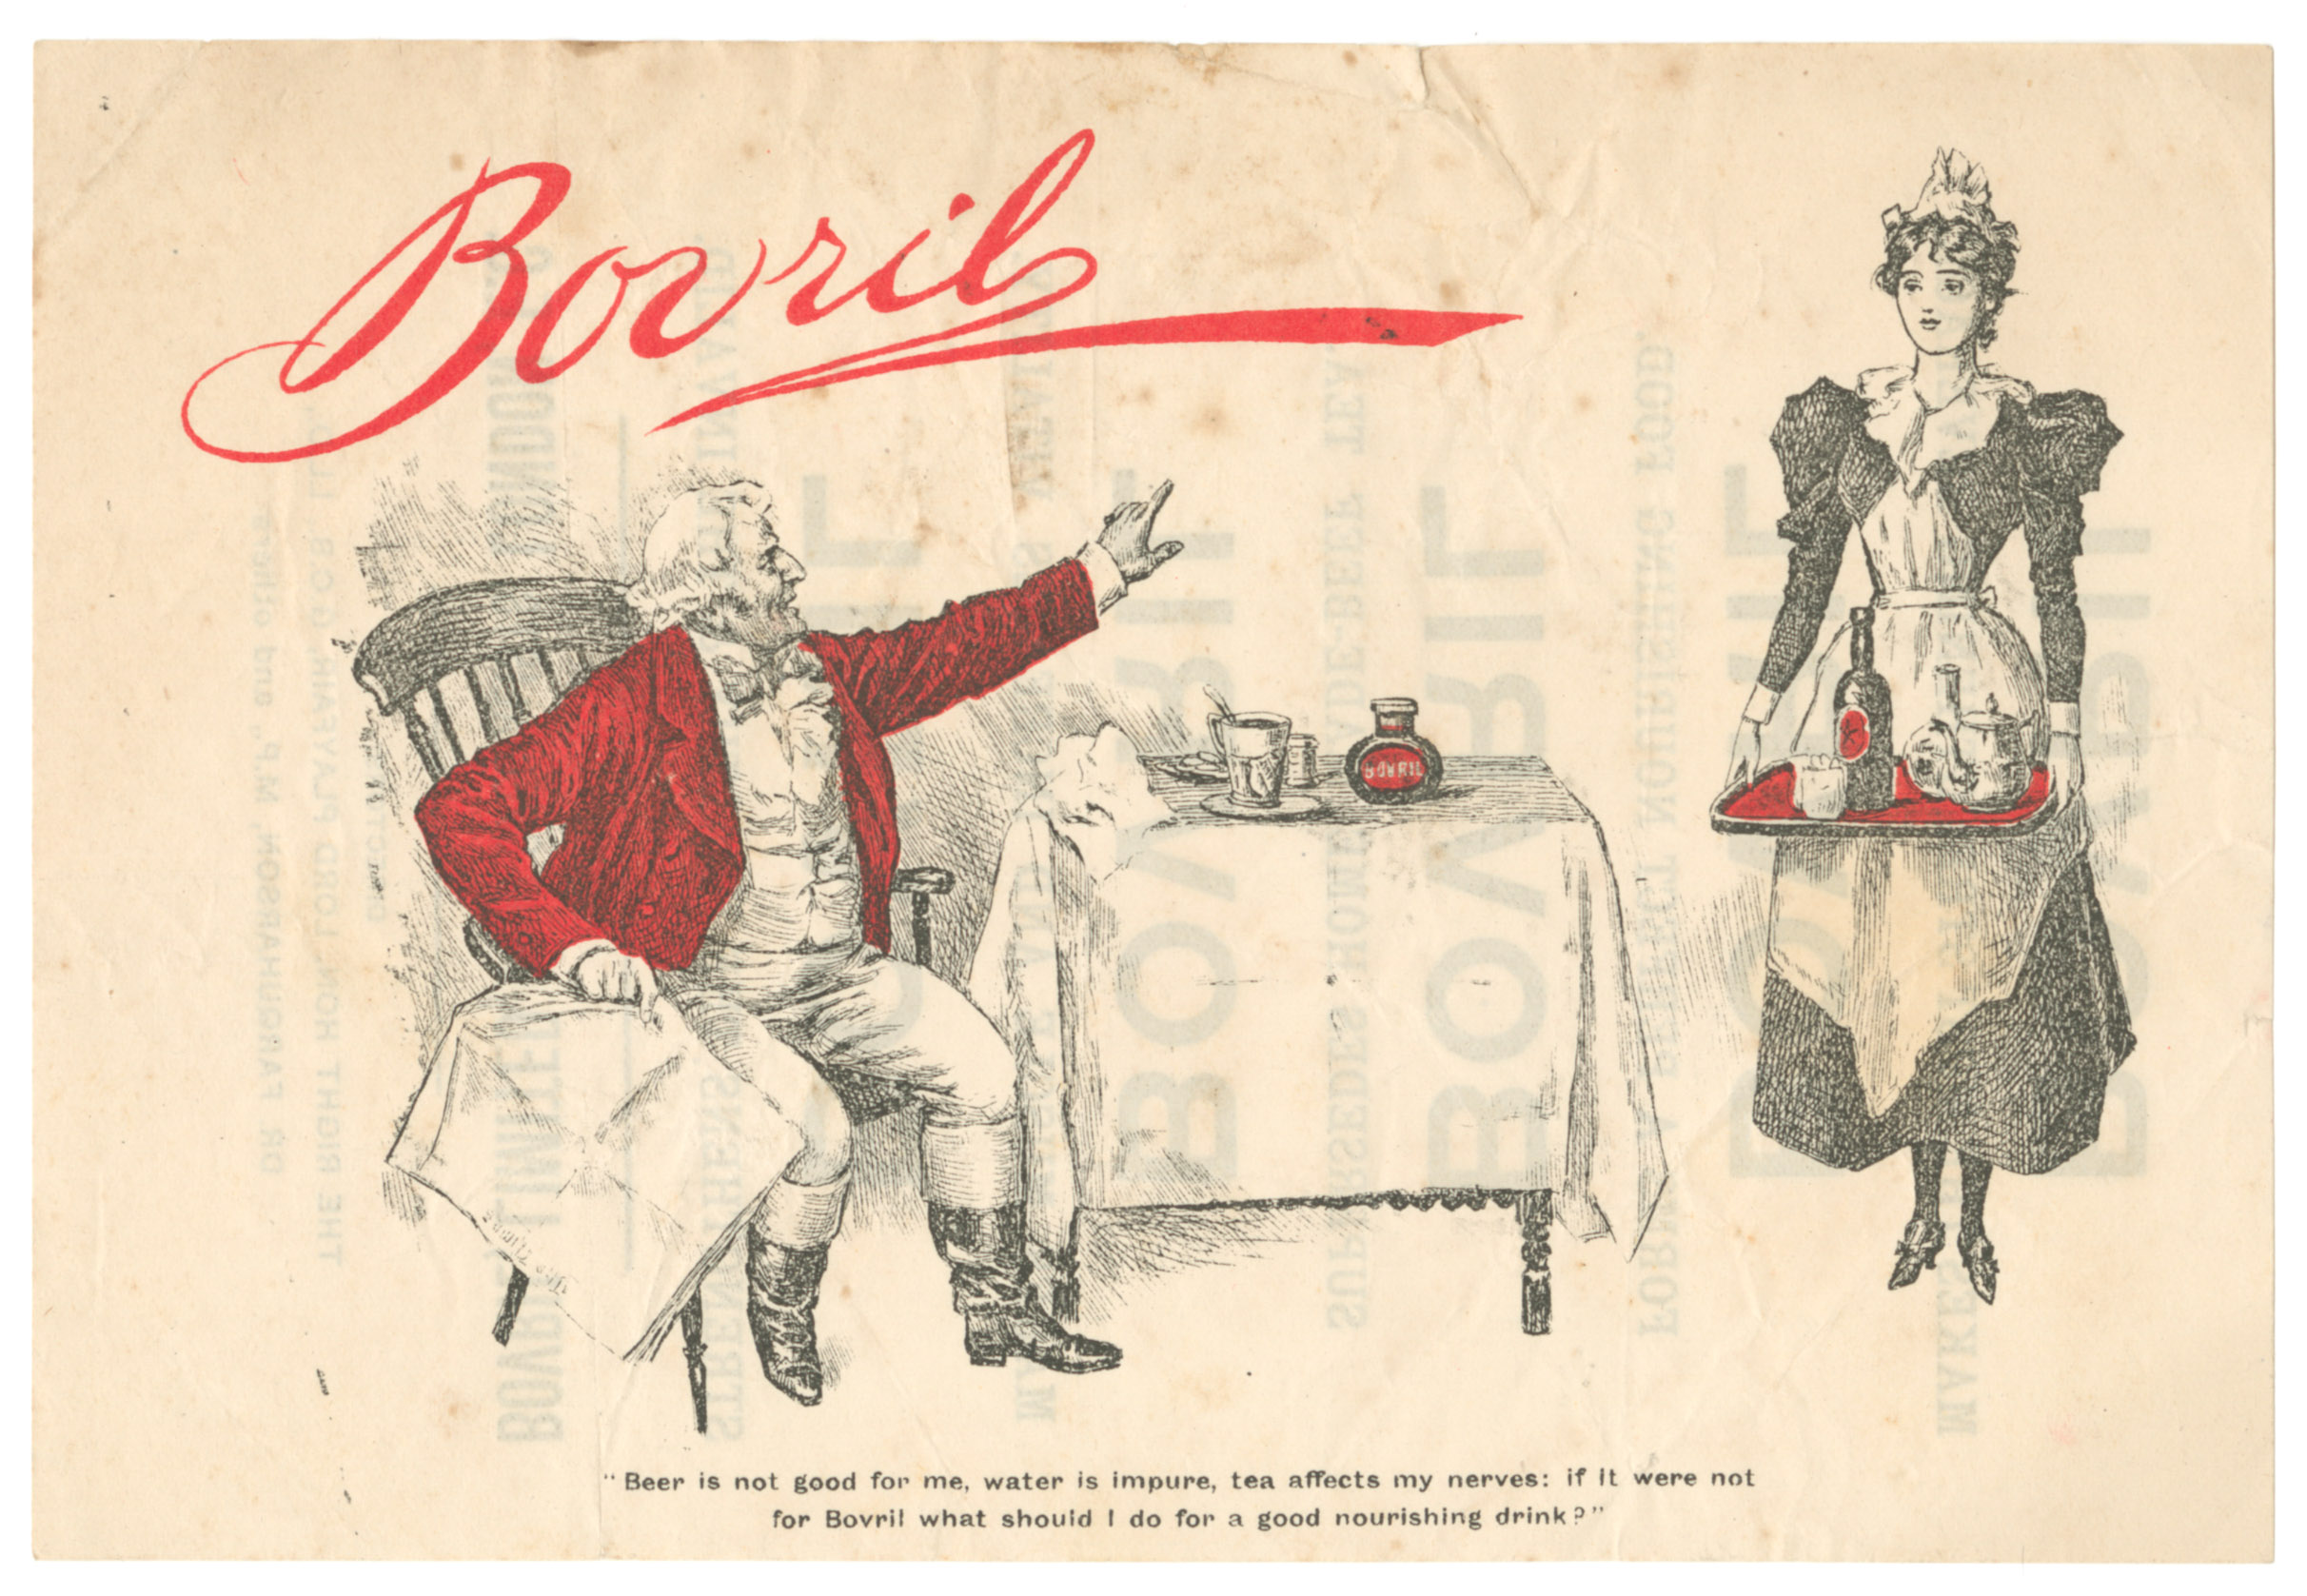 1898 advert for Bovril with the caption "Beer is not good for me, water is impure, tea affects my nerves: if it were not for Bovril what should I do for a good nourishing drink?: